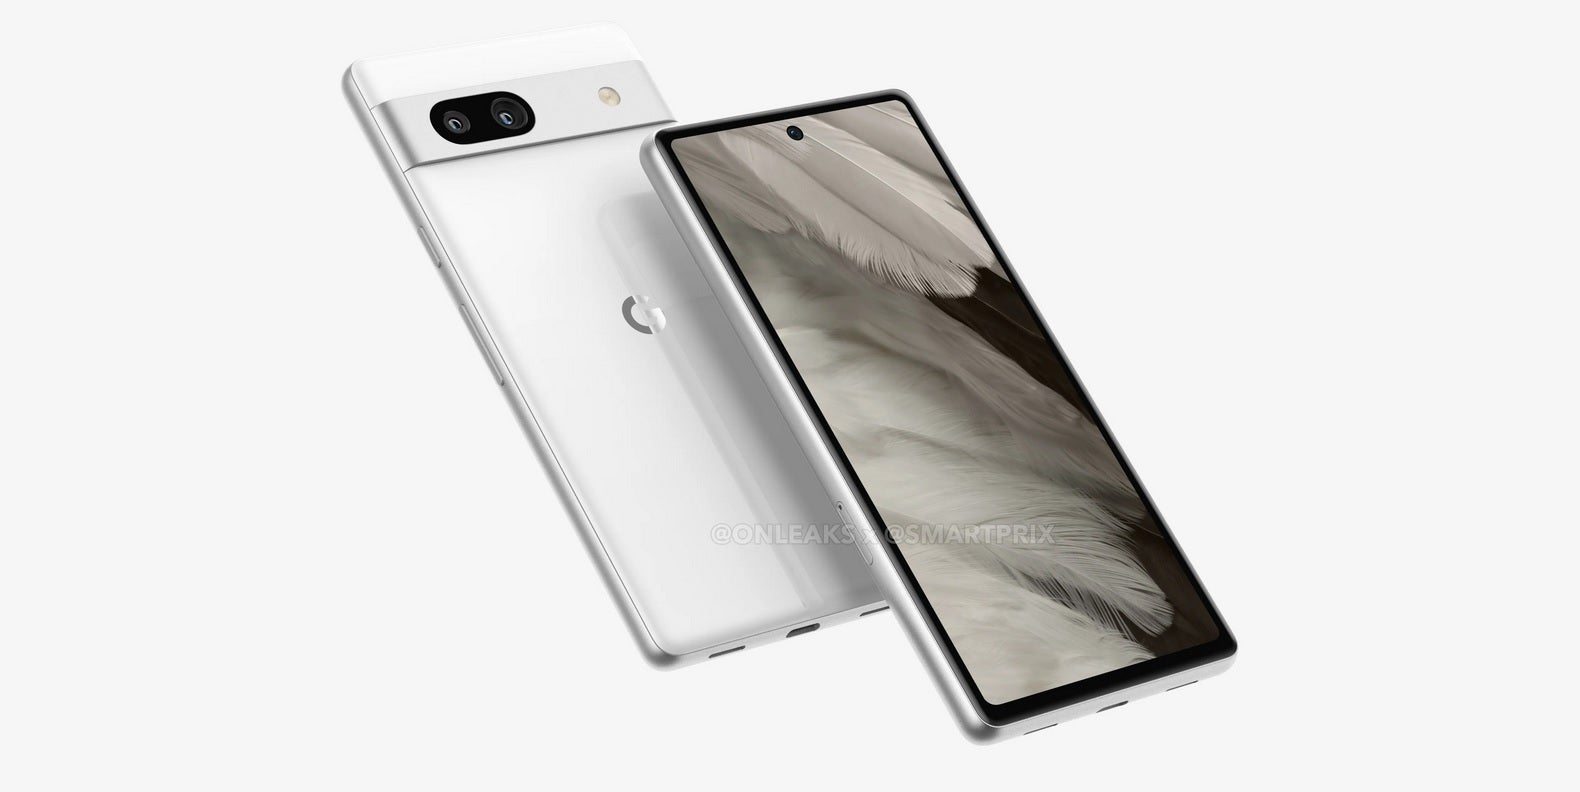 Another render of Google's next Pixel mid-ranger - Here's our first look at Google's 2023 mid-ranger, the Pixel 7a